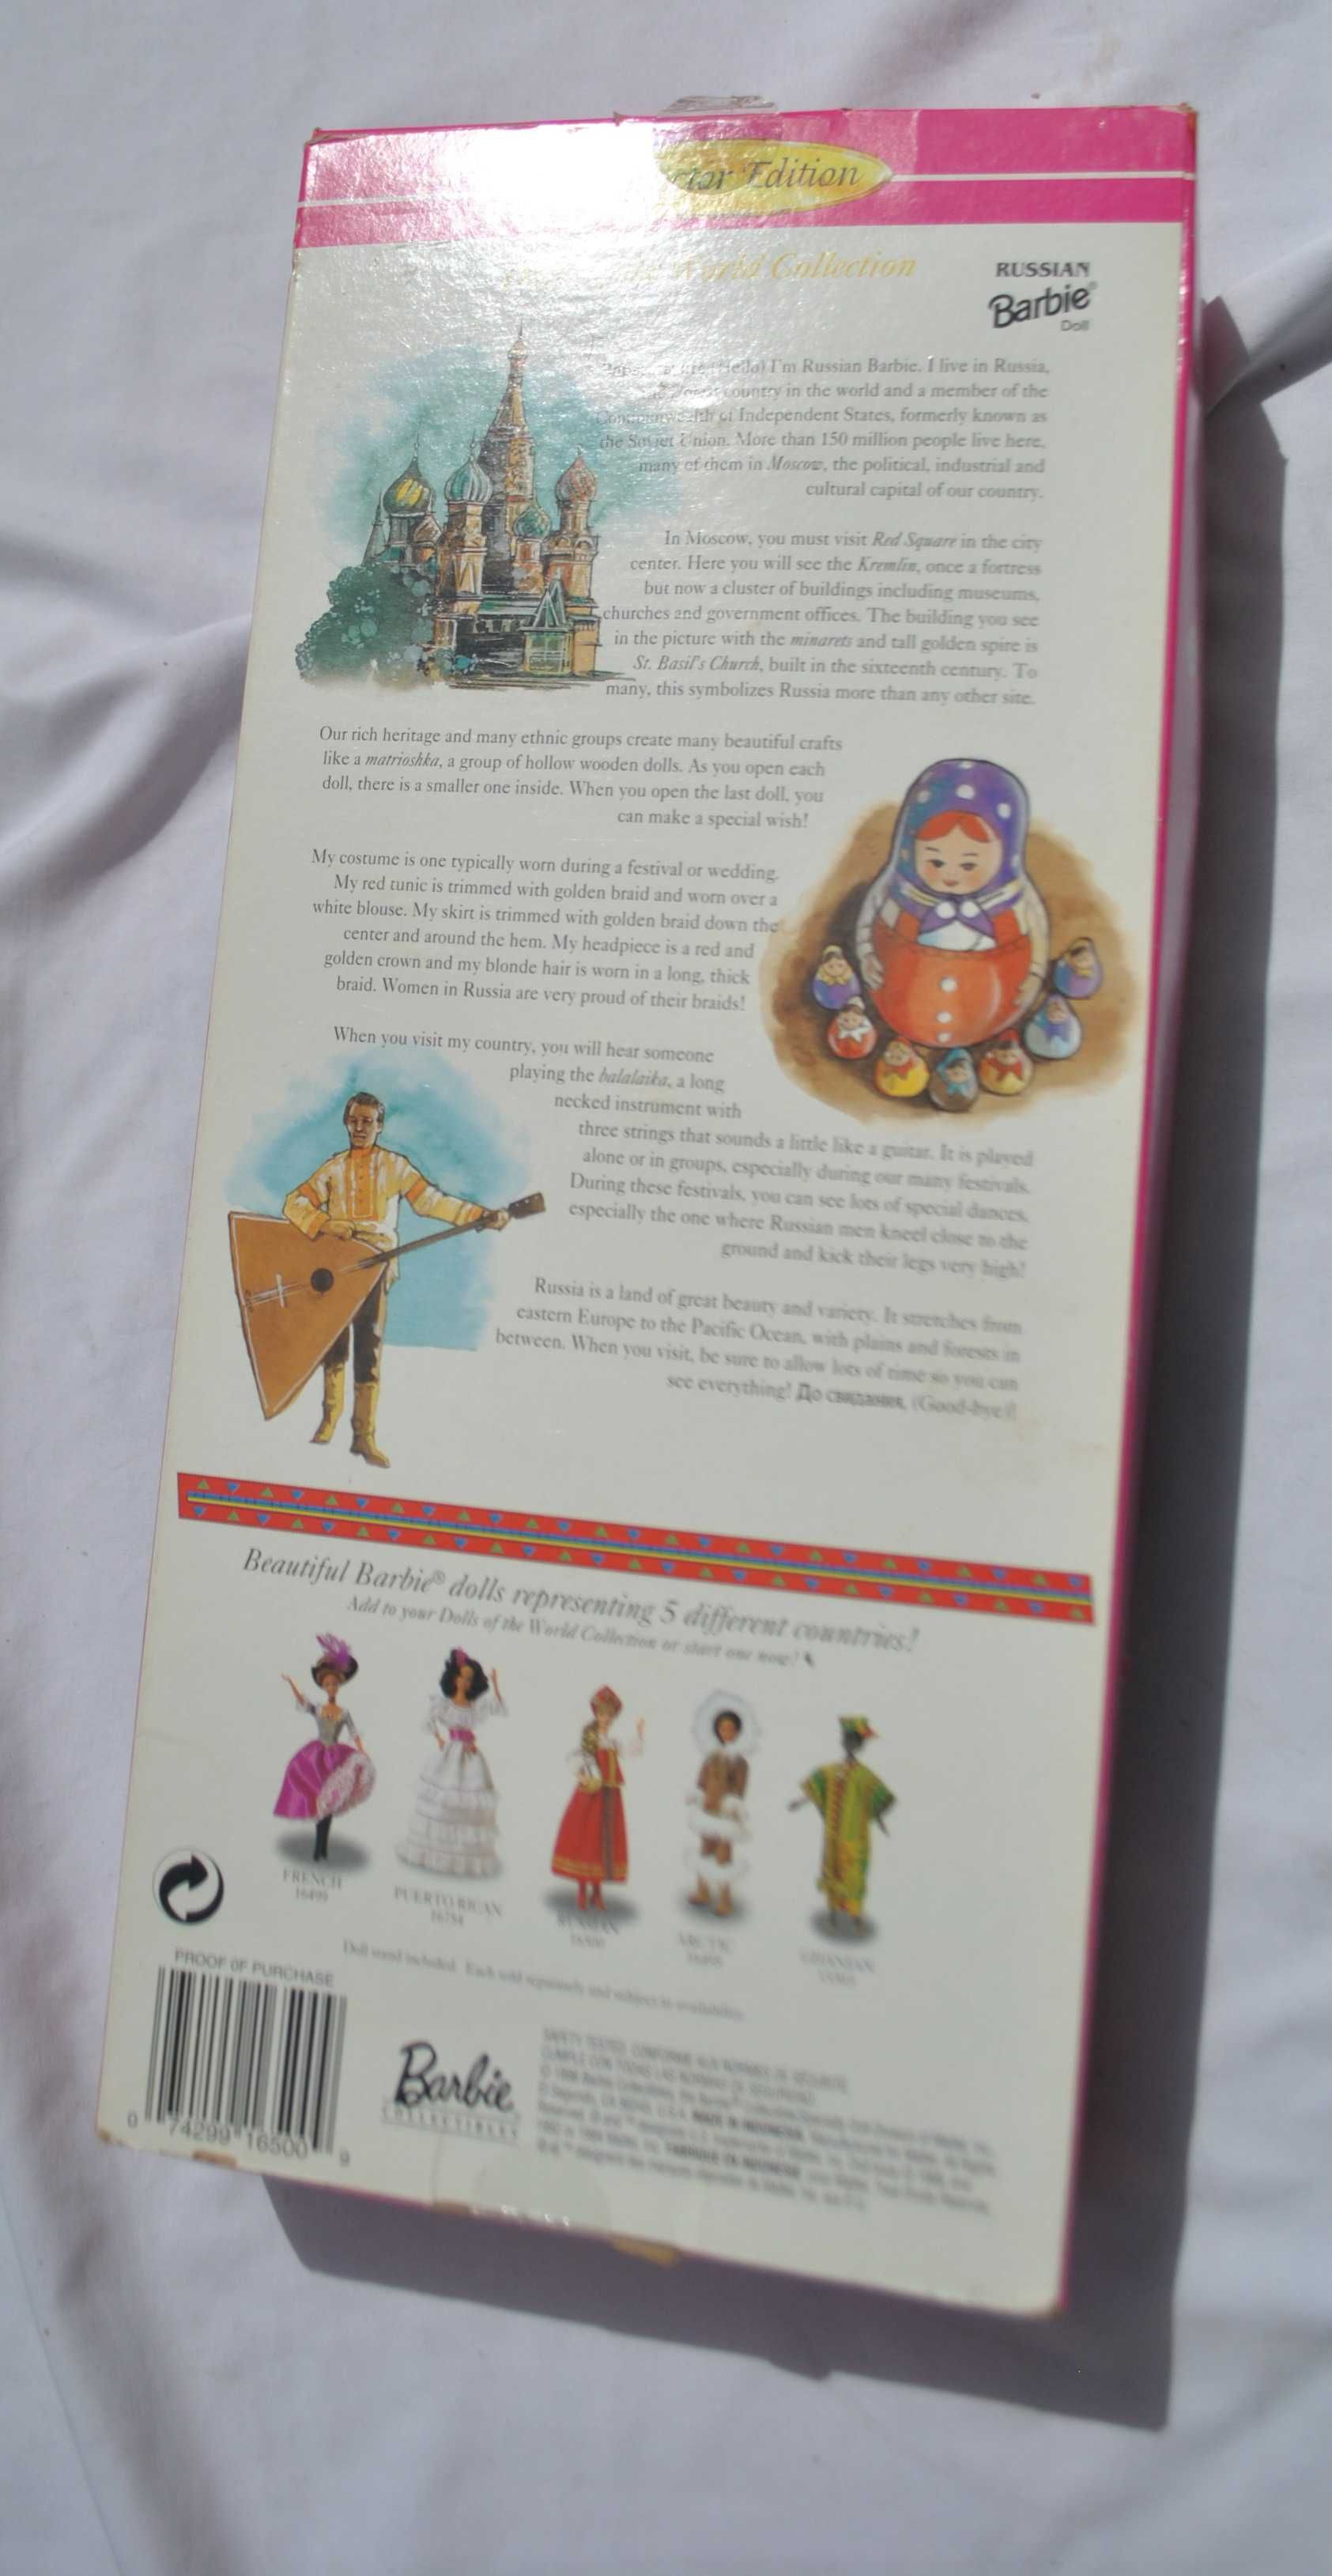 lalka barbie RUSSIAN dolls of the world collection 1996